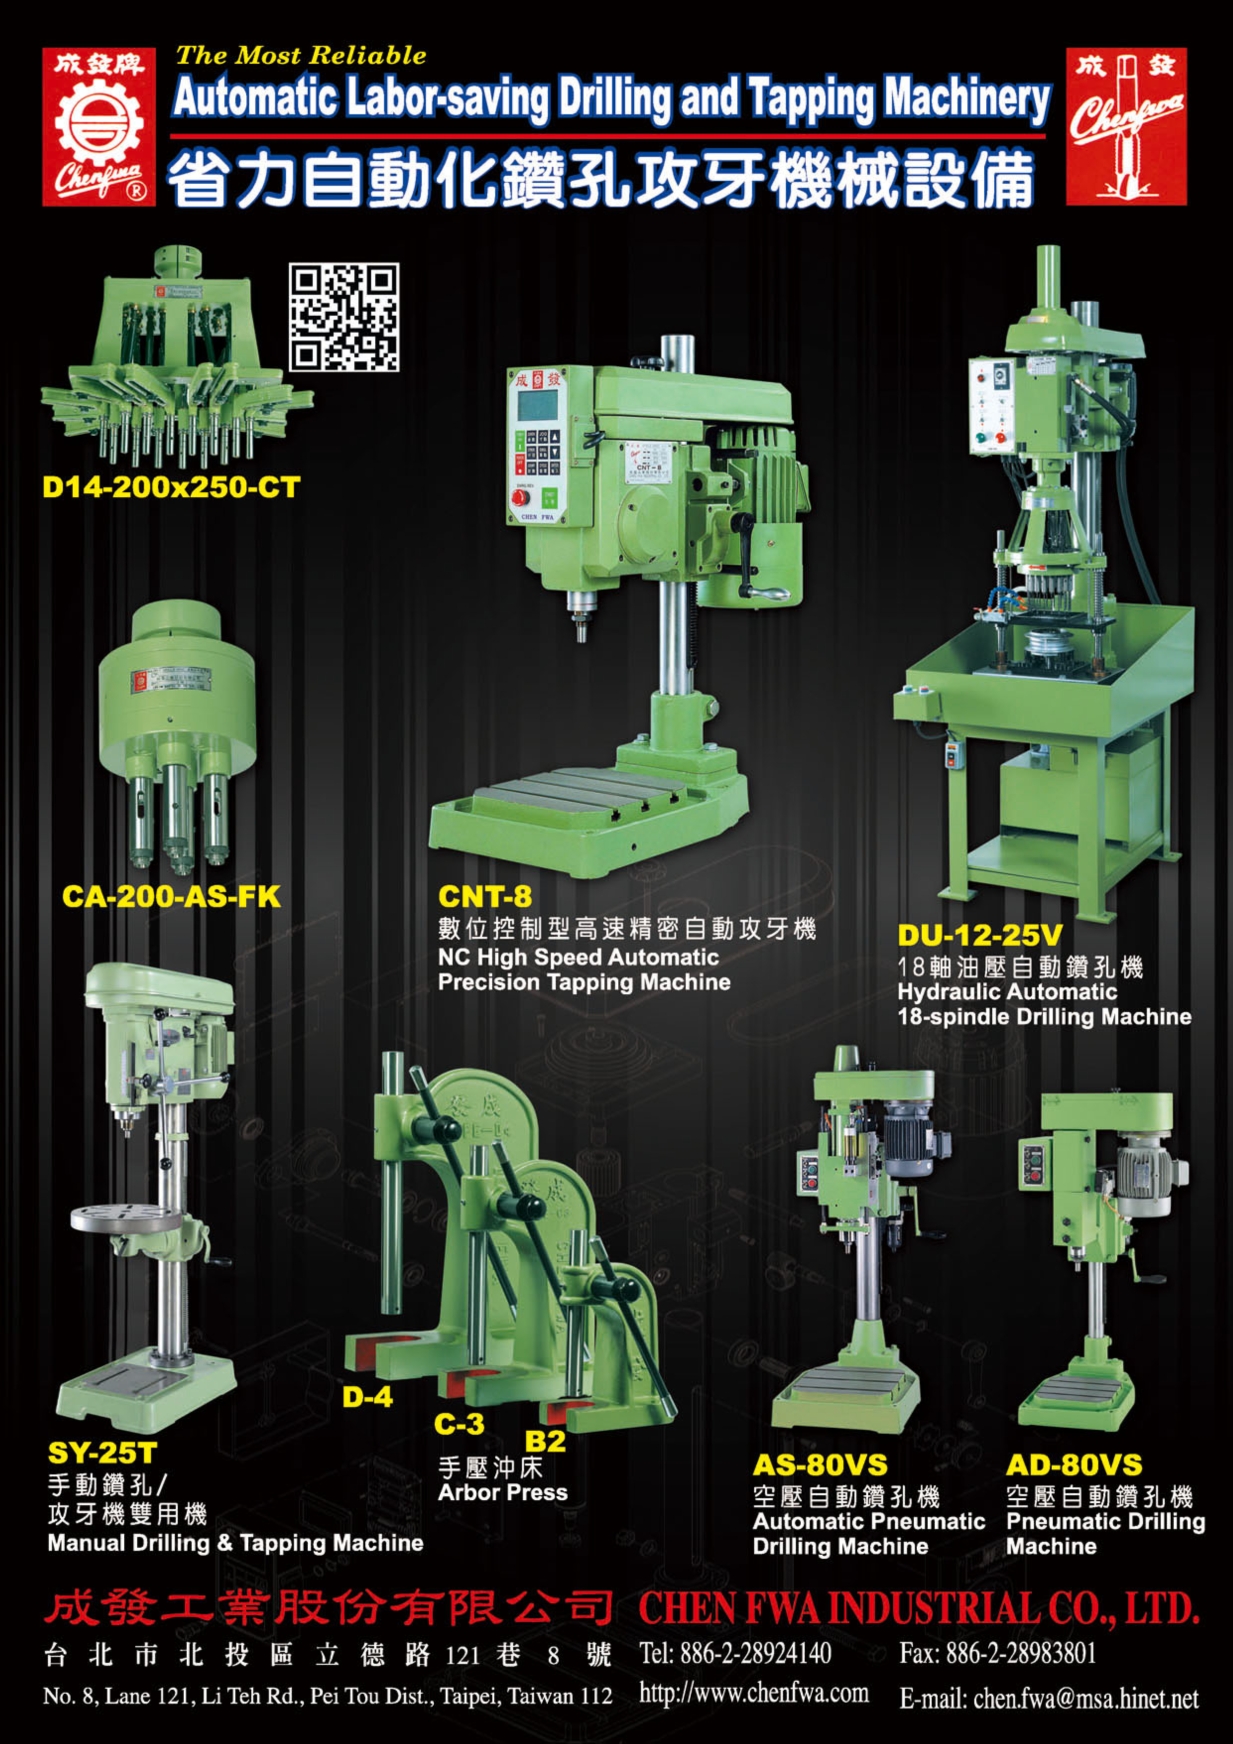 Who Makes Machinery in Taiwan CHEN FWA INDUSTRIAL CO., LTD.